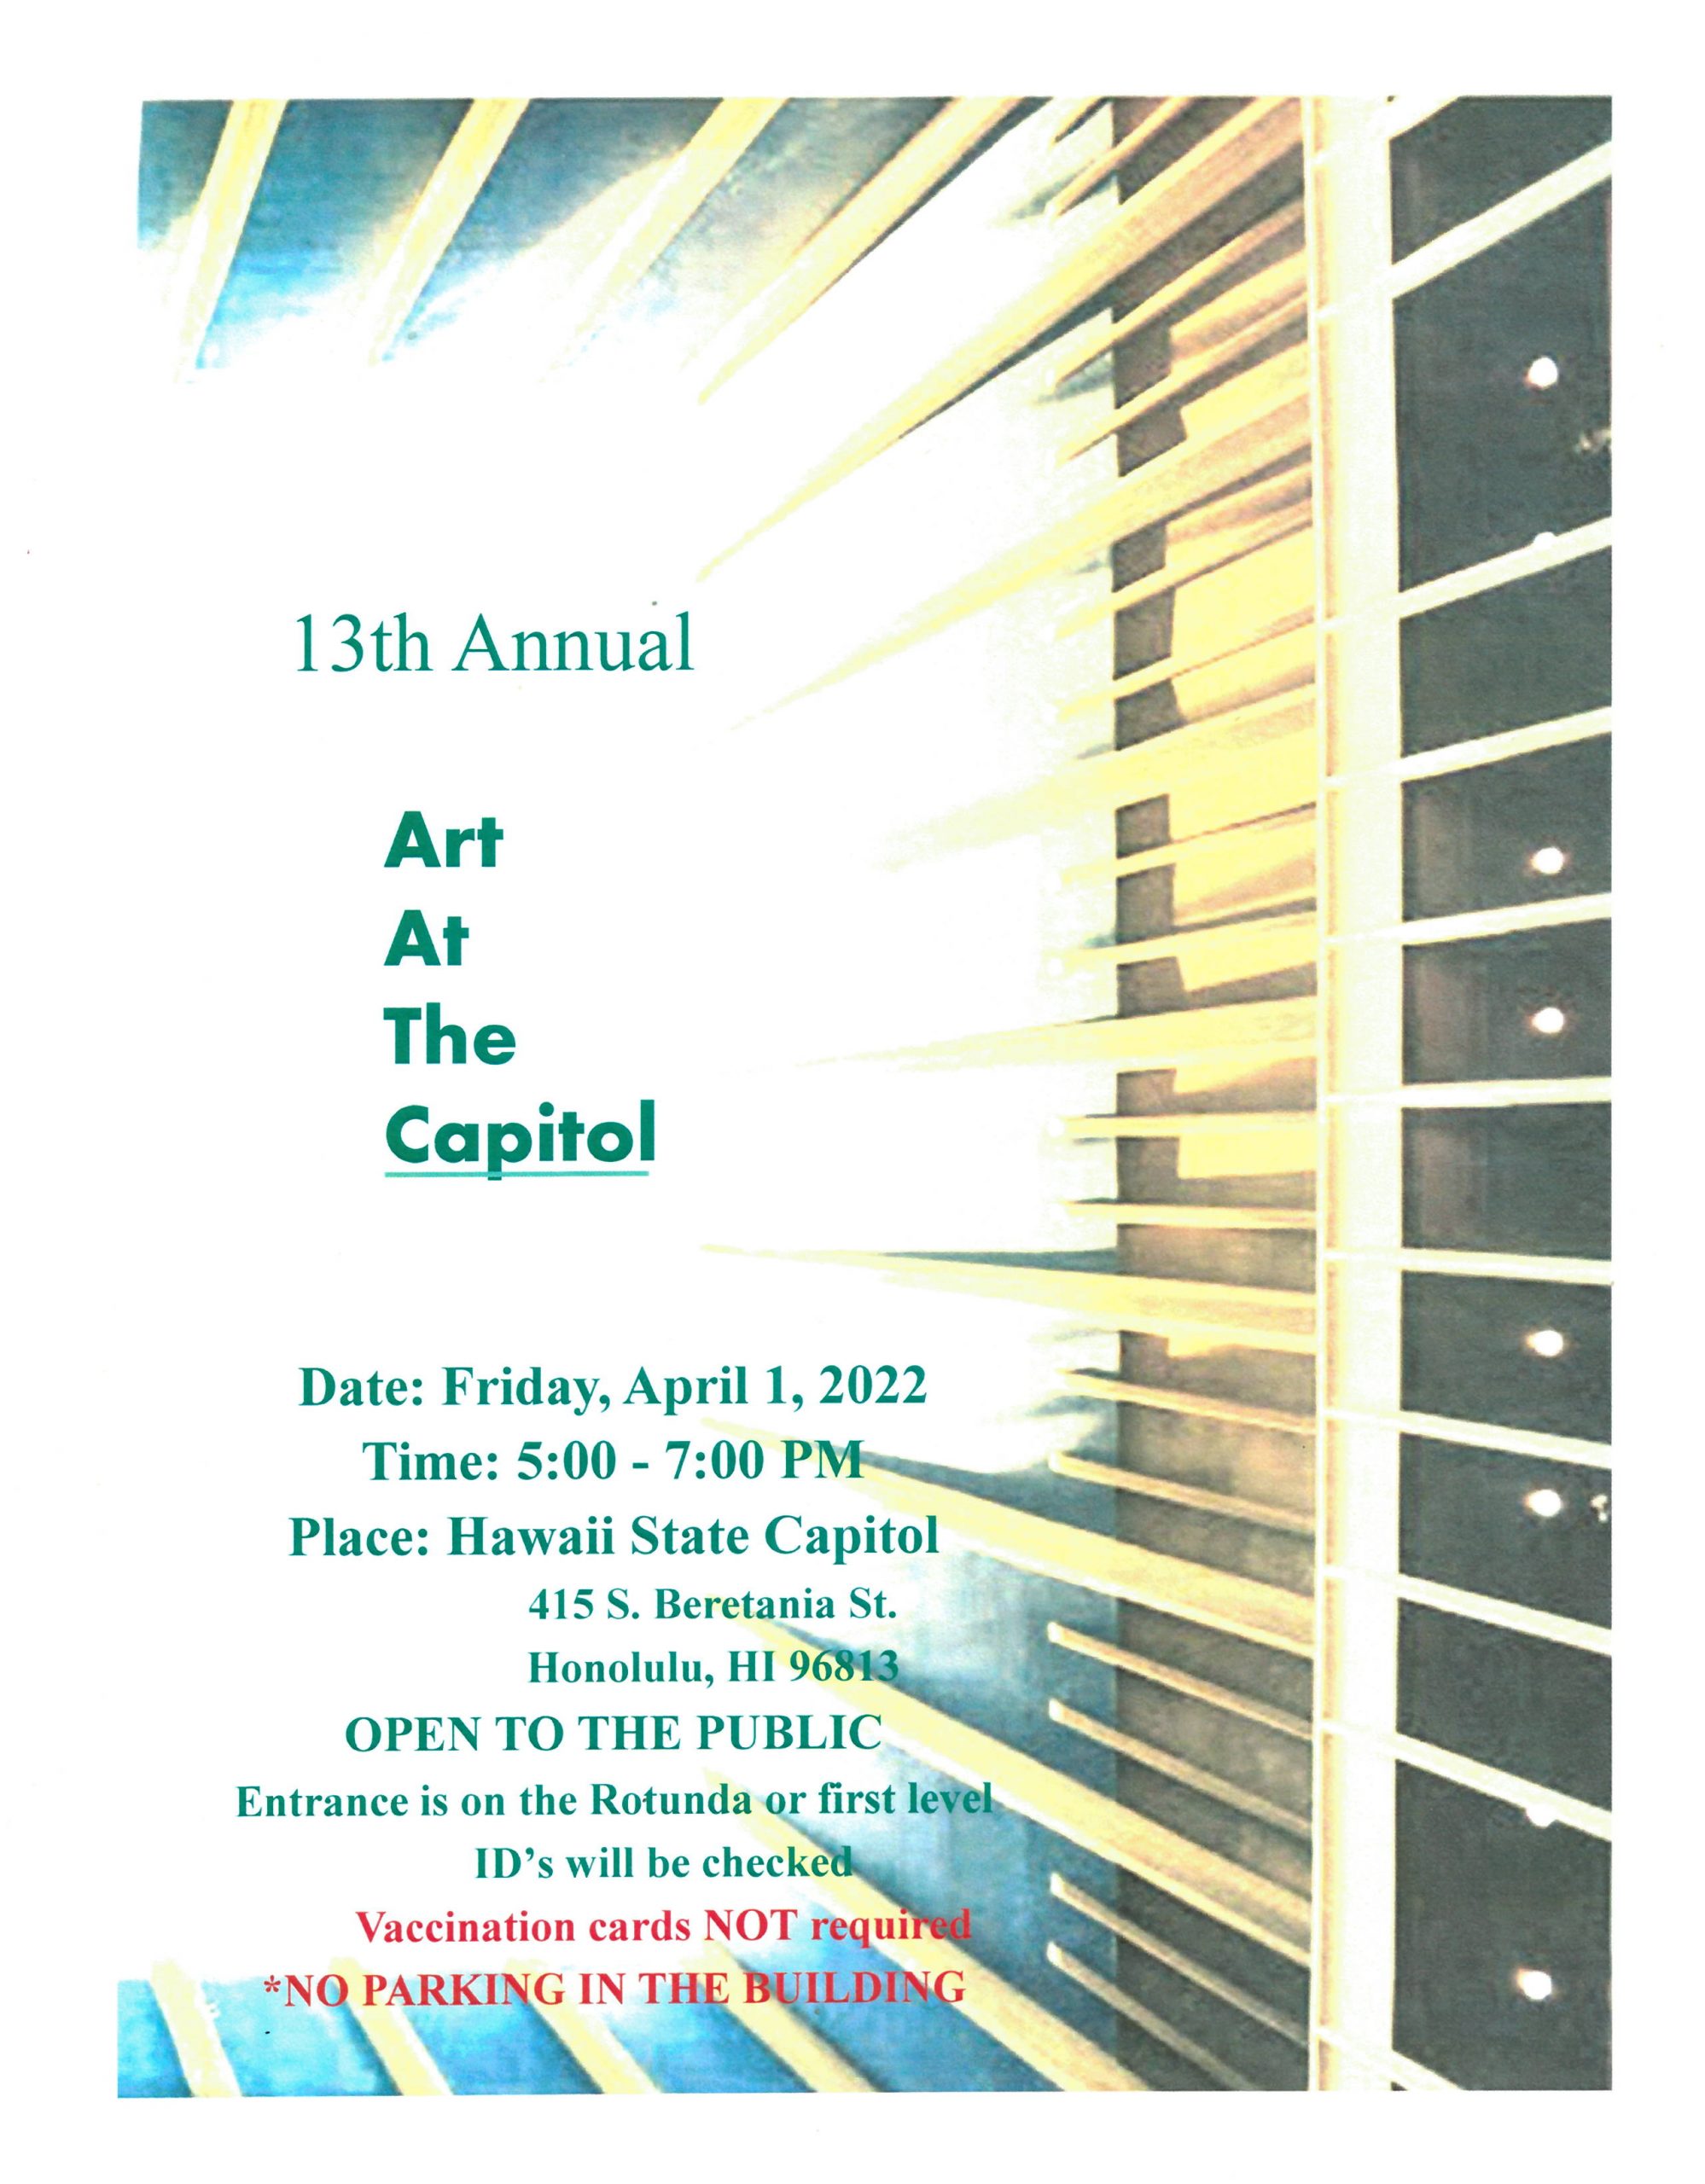 13th Annual Art at the Capitol. Date: Friday, April 1, 2022. Time: 5:00-7:00 PM. Place: Hawaii State Capitol, 415 S. Beretania St., Honolulu, HI 96813. Open to the Public. Entrance is on the Rotunda or first level. ID's will be checked. Vaccination cards NOT required. *No parking in the building.